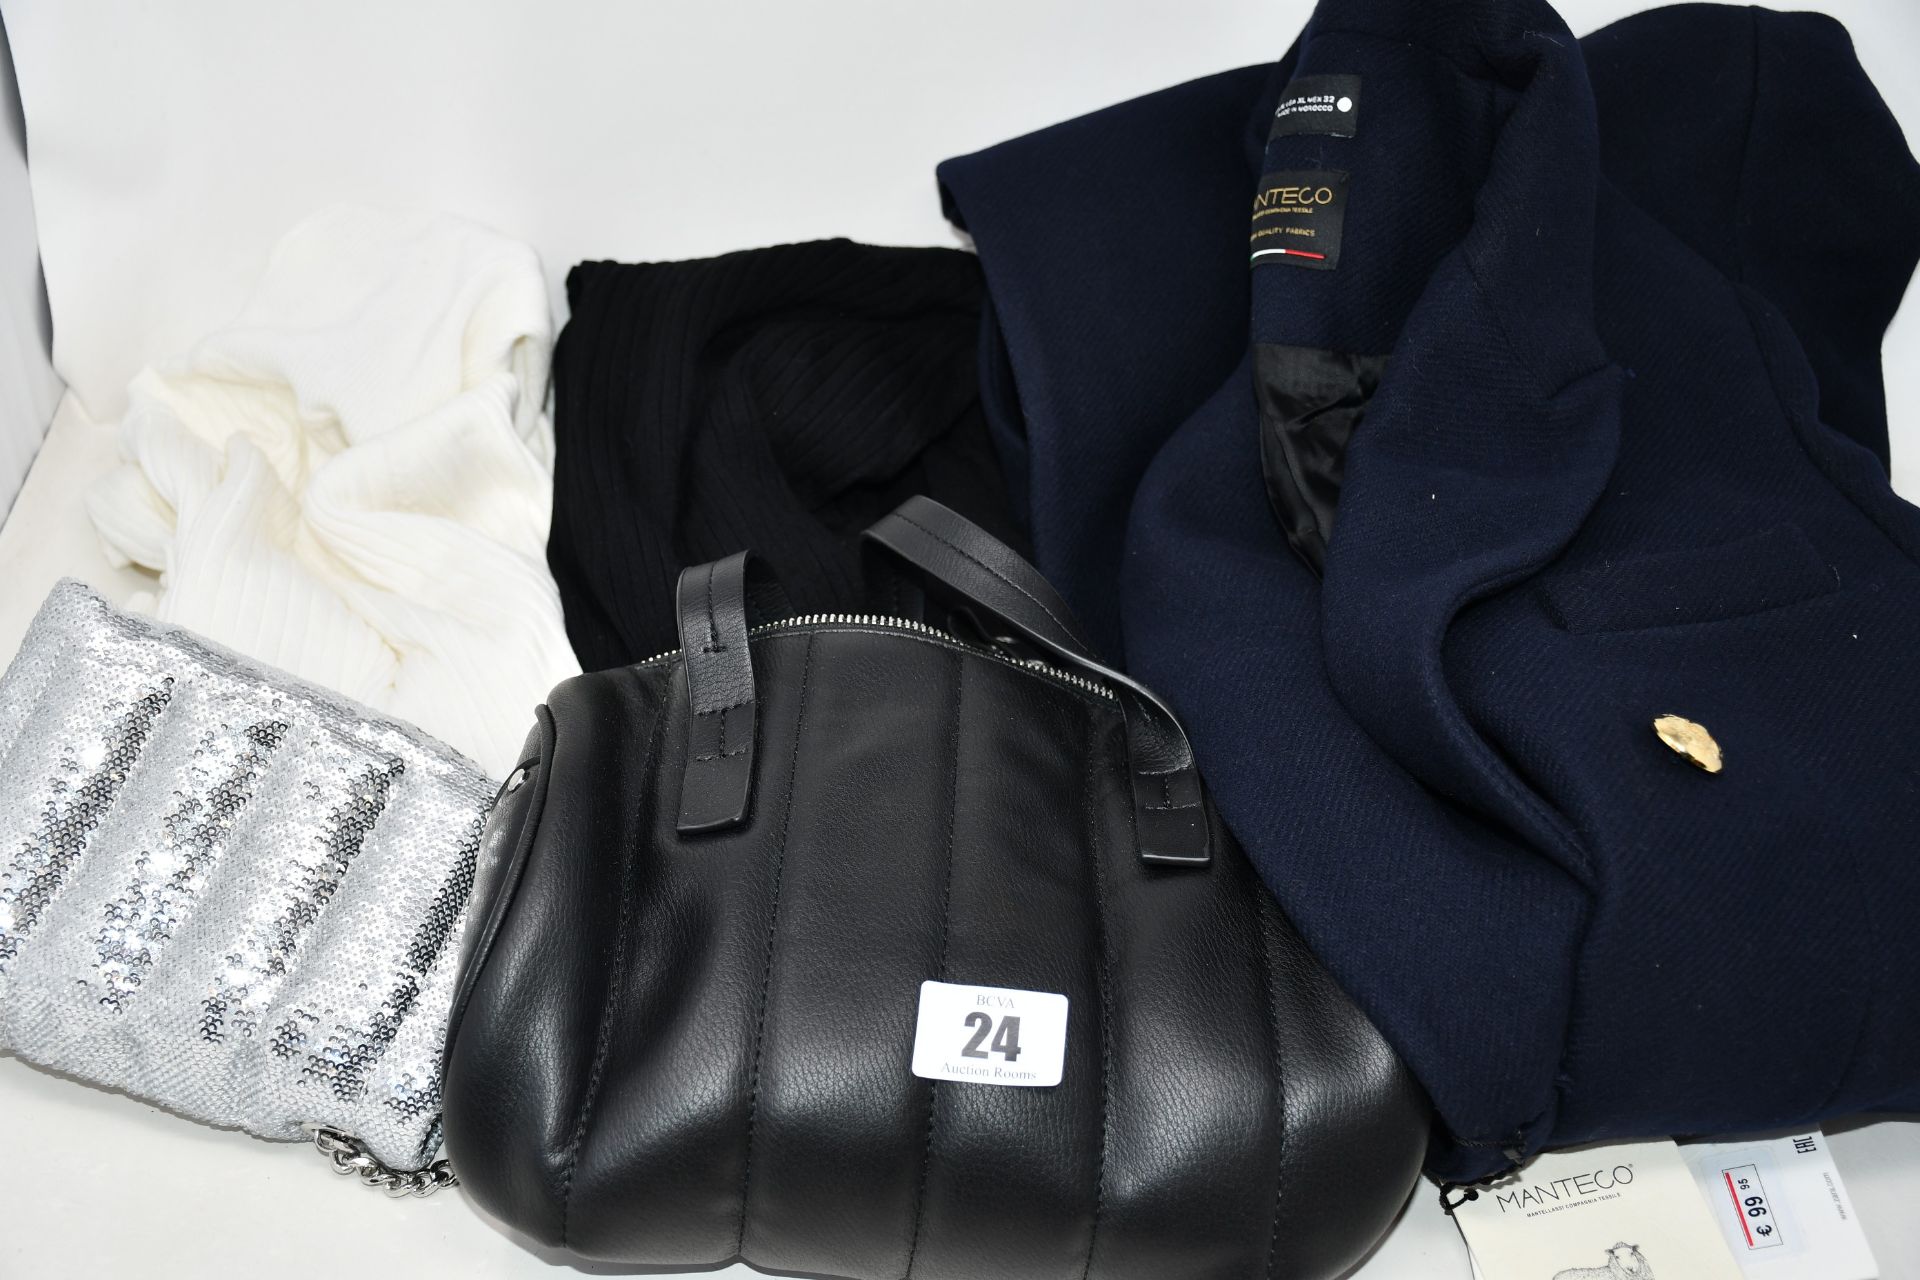 Five items of as new Zara clothing and accessories; a Manteco wool cost (XL - RRP €100), two